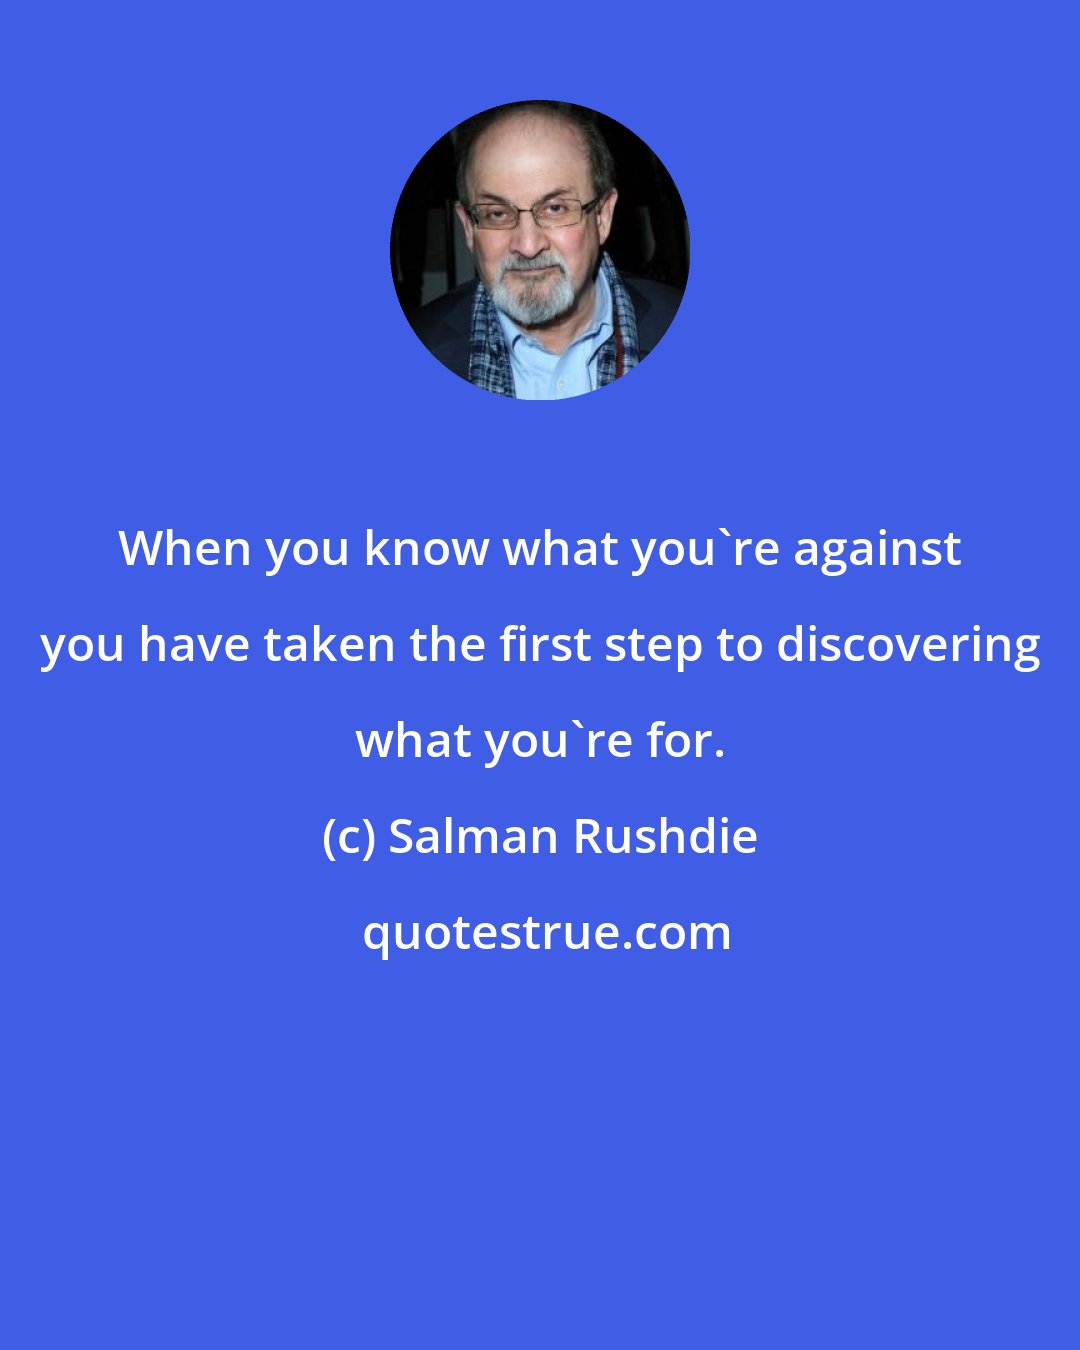 Salman Rushdie: When you know what you're against you have taken the first step to discovering what you're for.